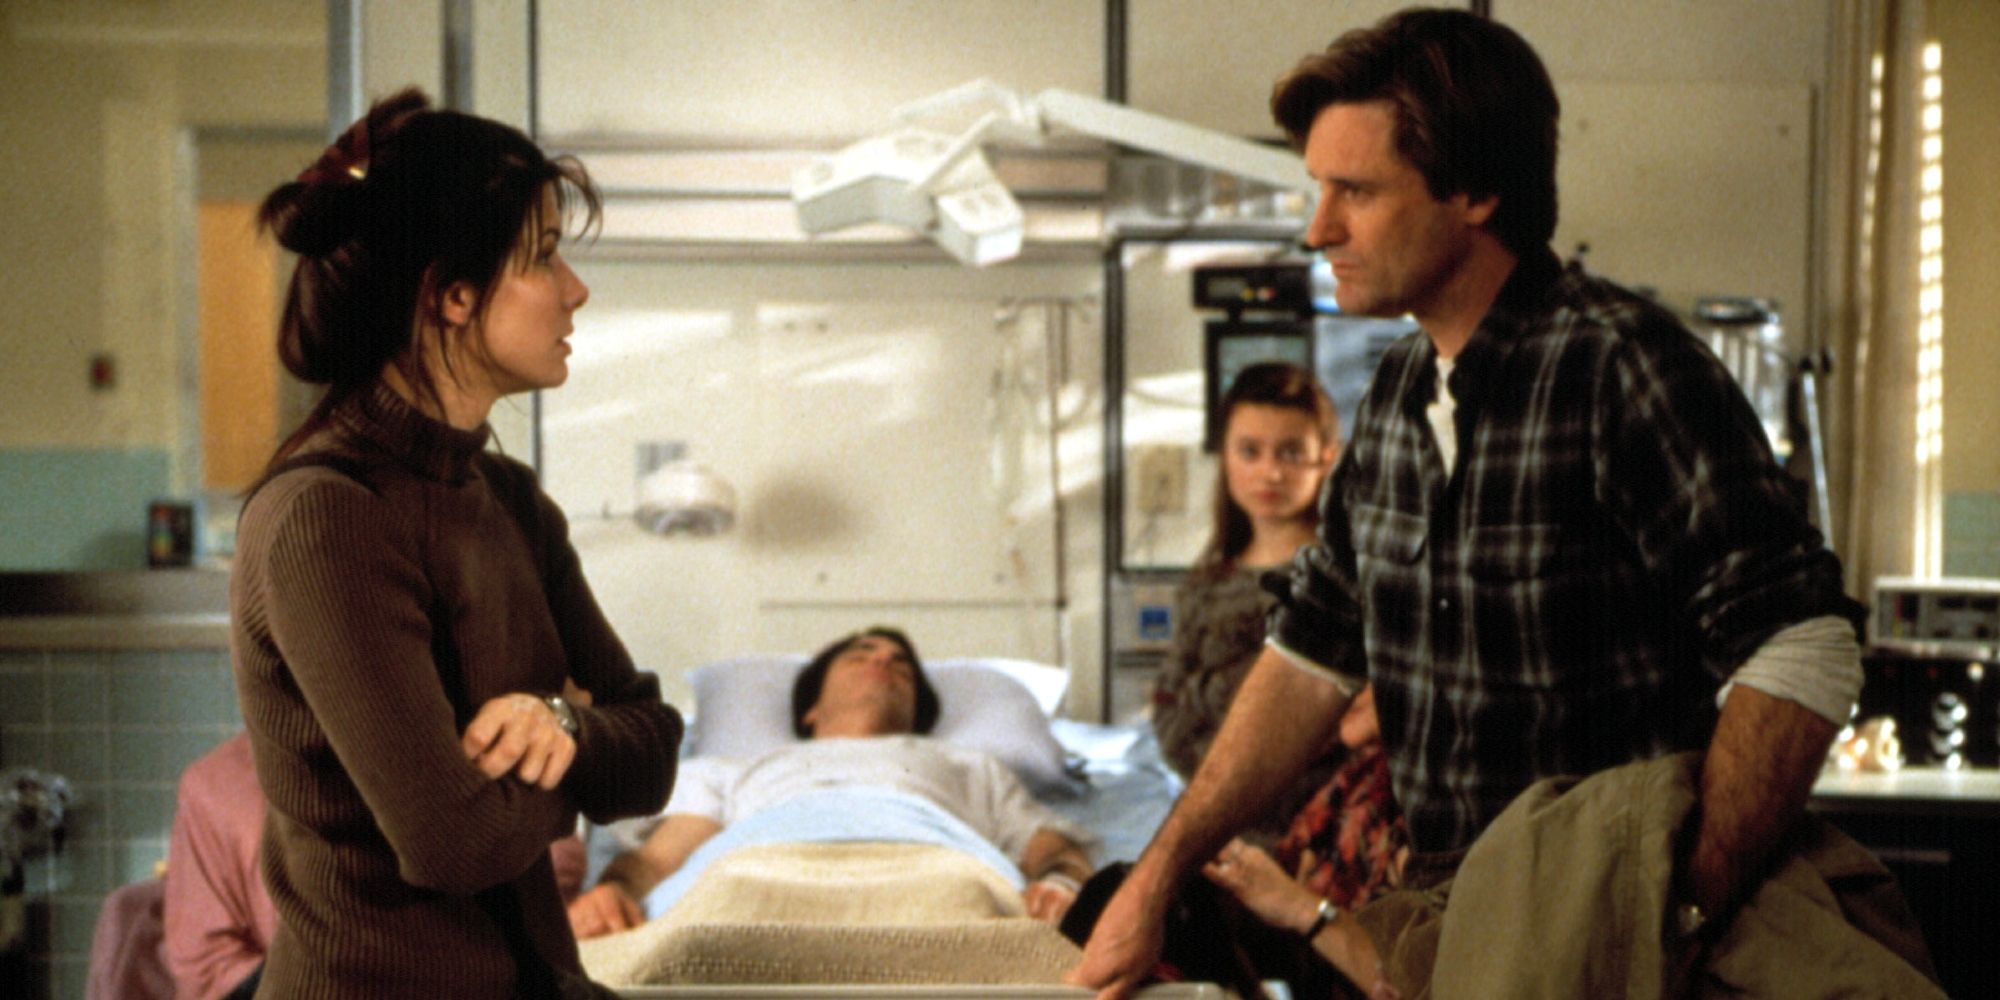 Sandra Bullock and Bill Pullman as Lucy and Jack talking at a hospital room in While You Were Sleeping.